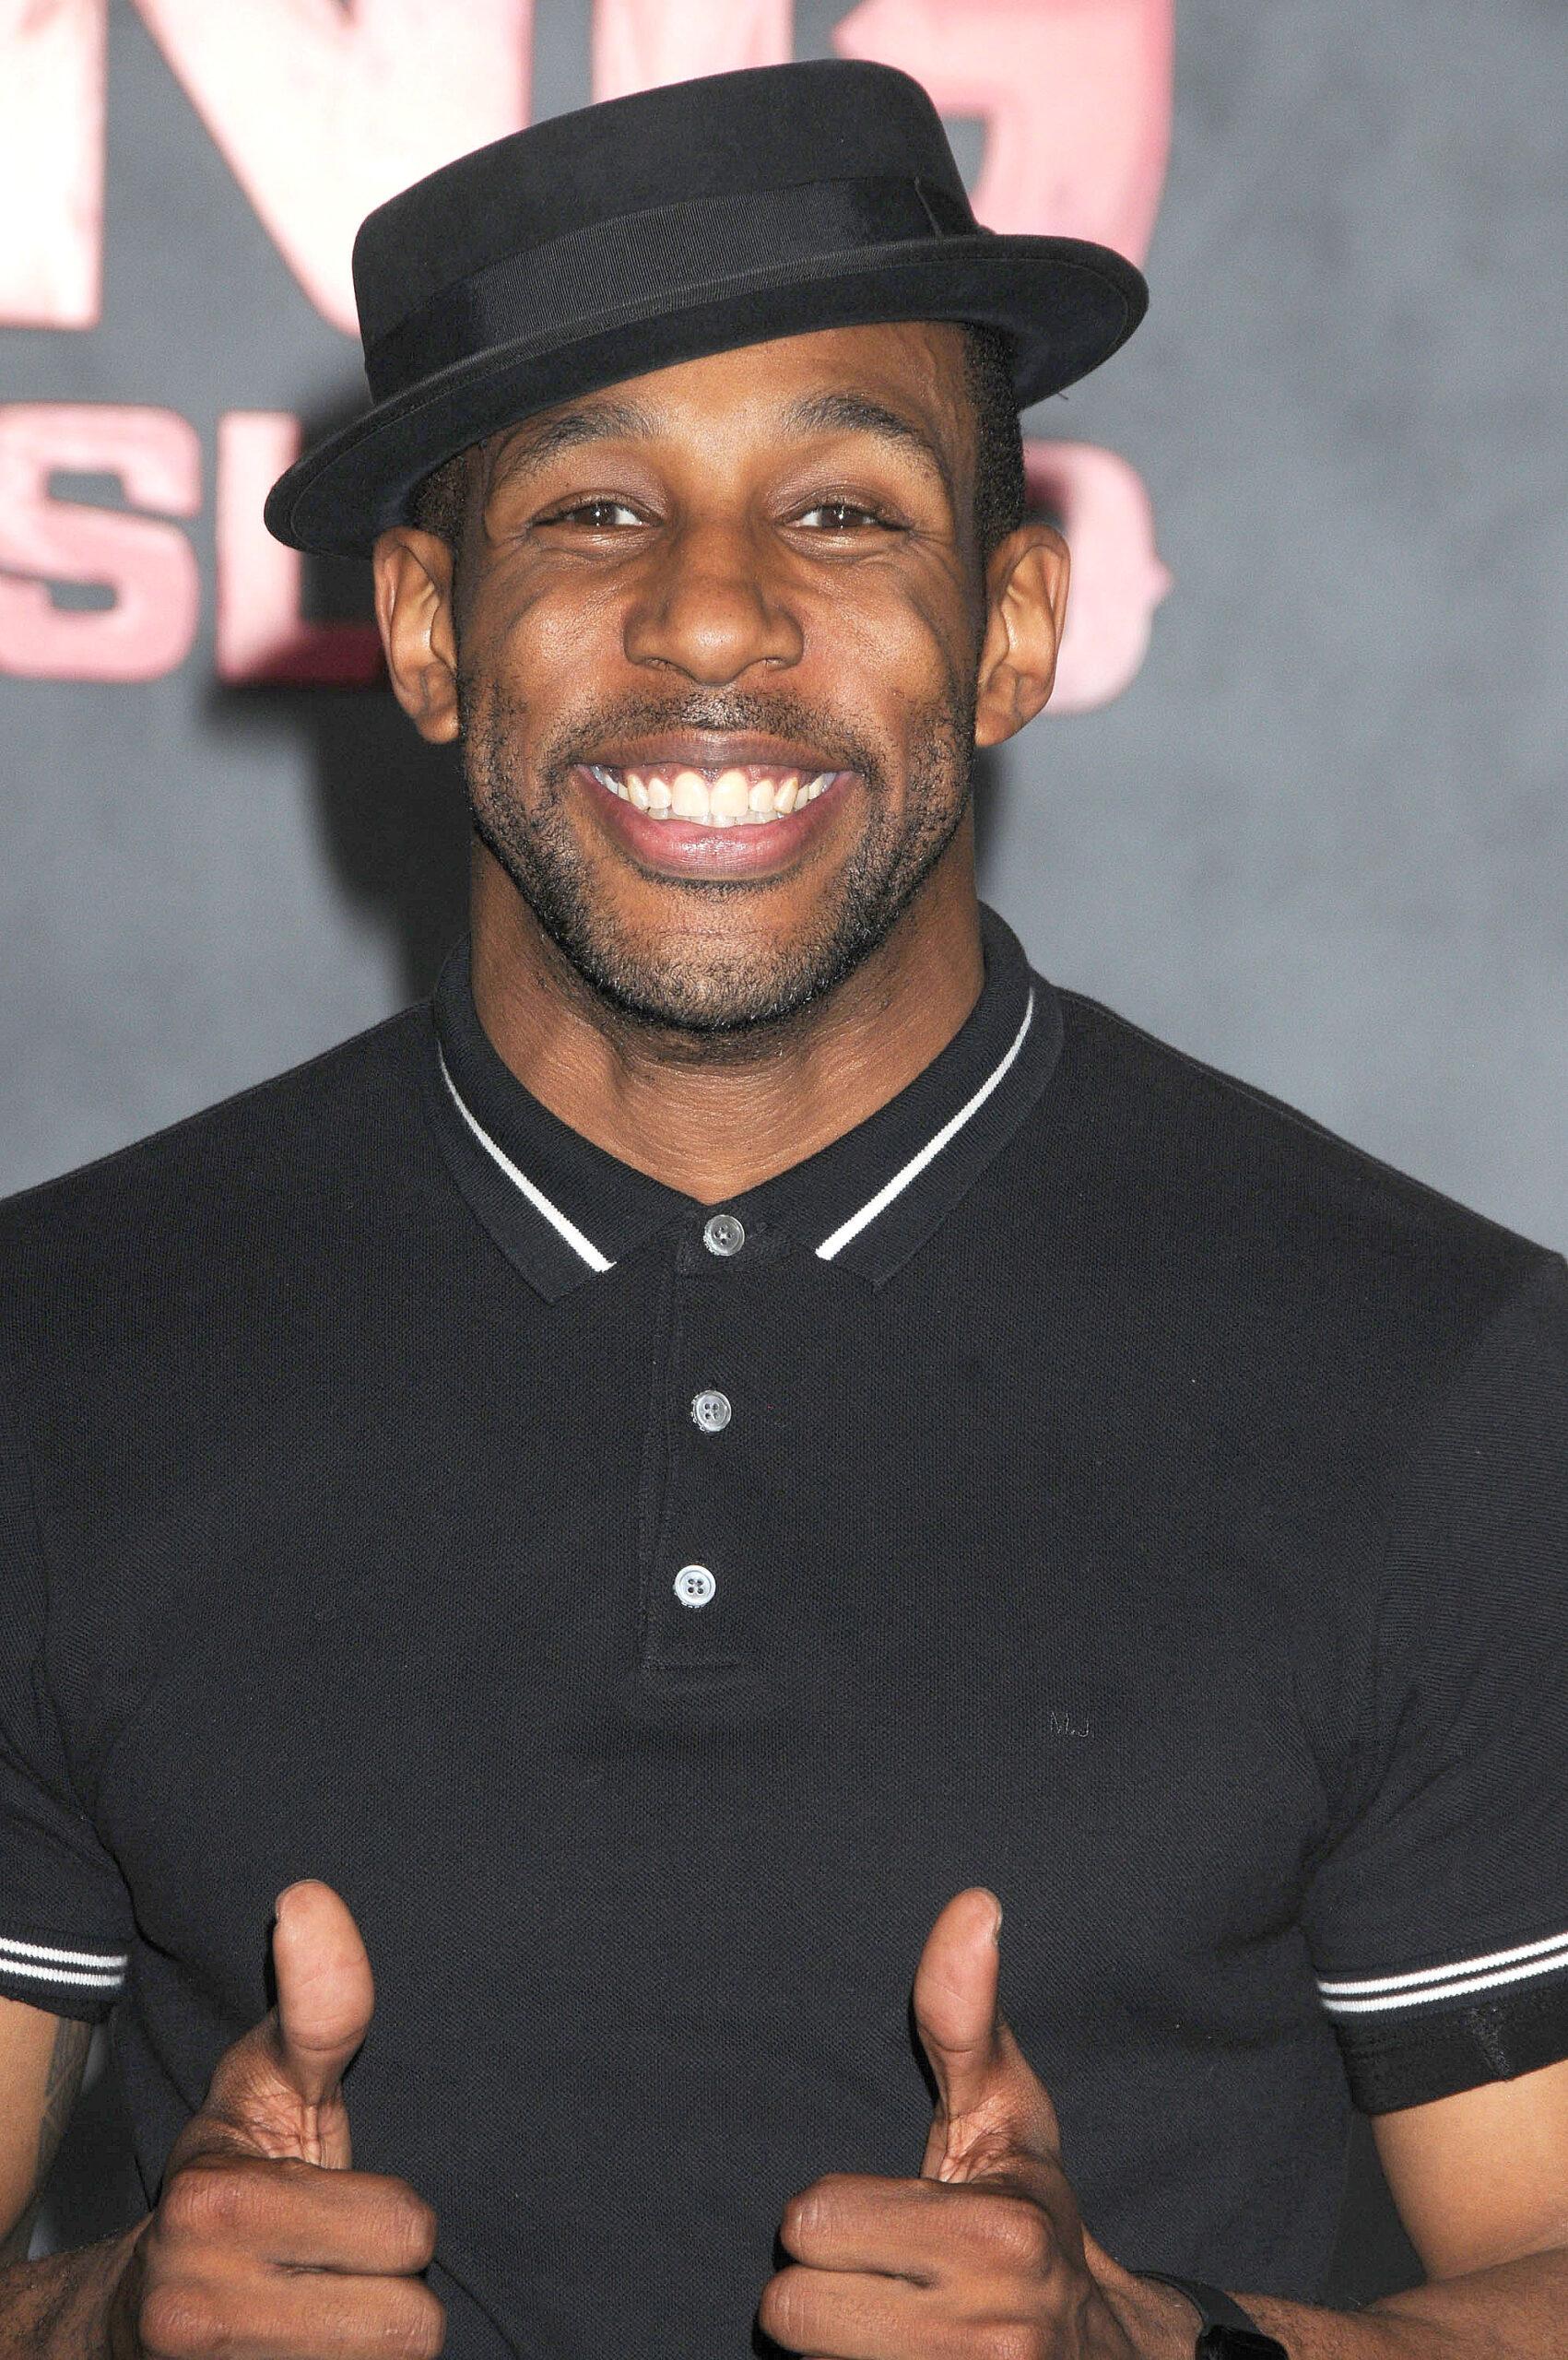 Stephen tWitch Boss Celebrities arrive at the 'Kong: Skull Island' premiere in Hollywood